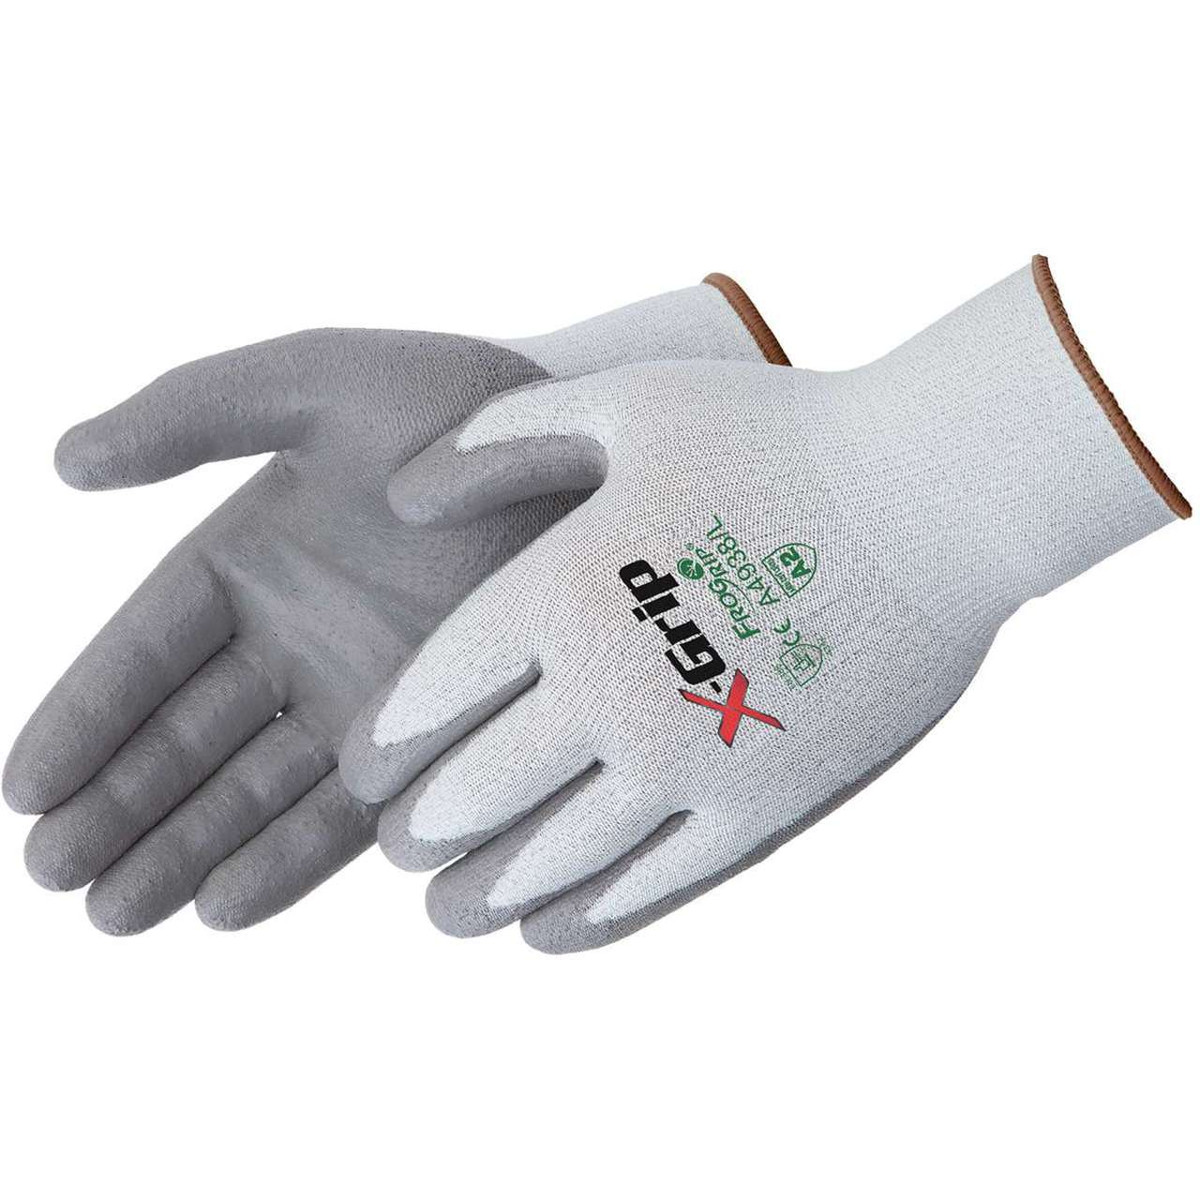 FroGrip 4729CA Camouflage EN1 Cut Textured Latex Coated Gloves